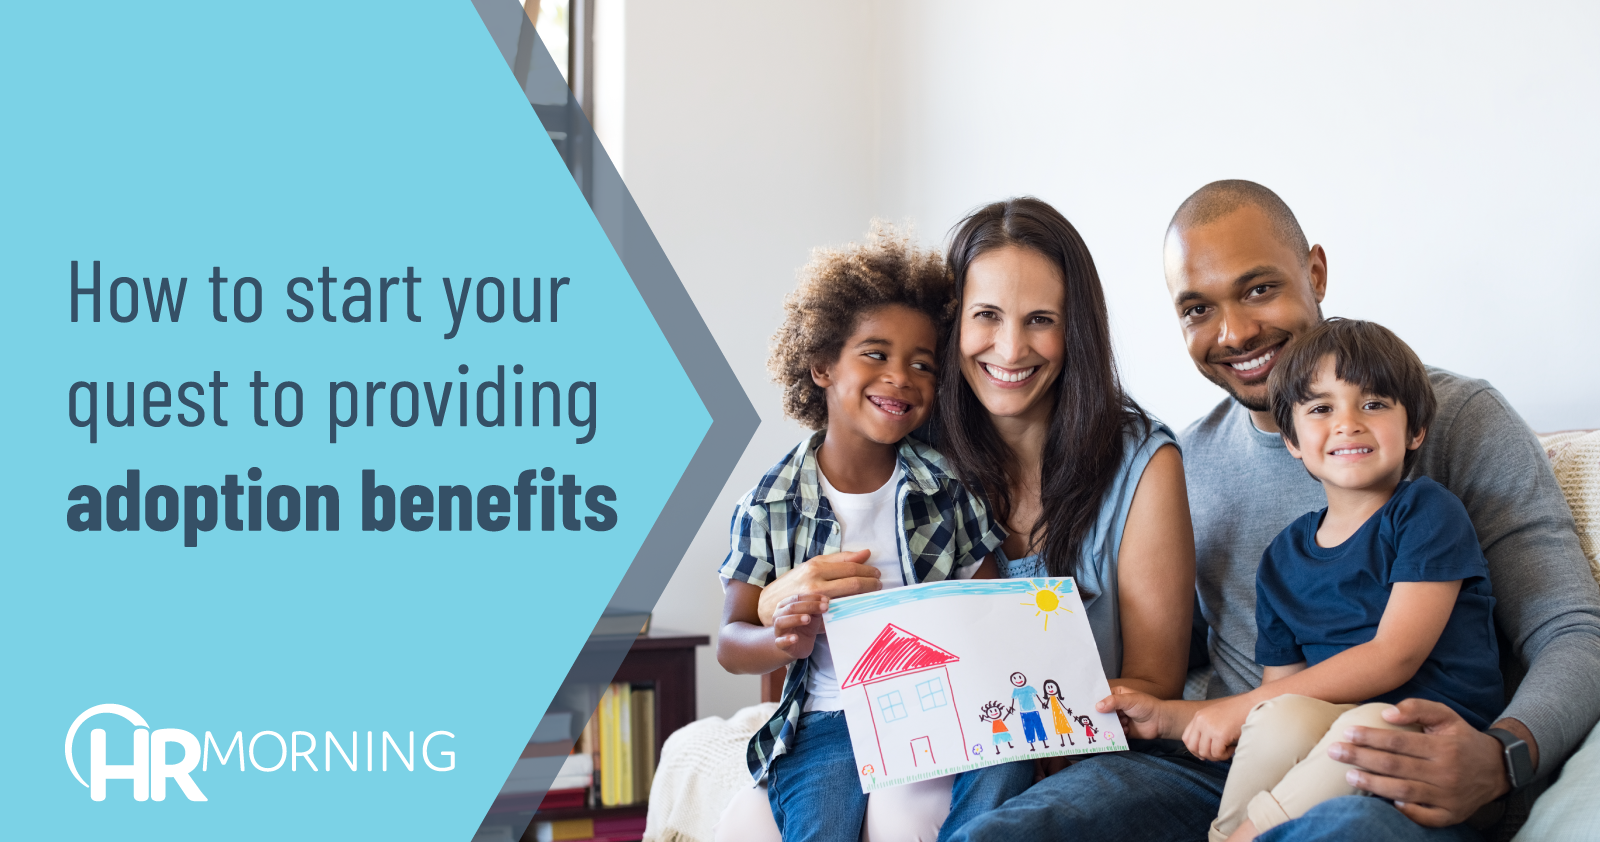 How To Start Your Quest To Providing Adoption Benefits